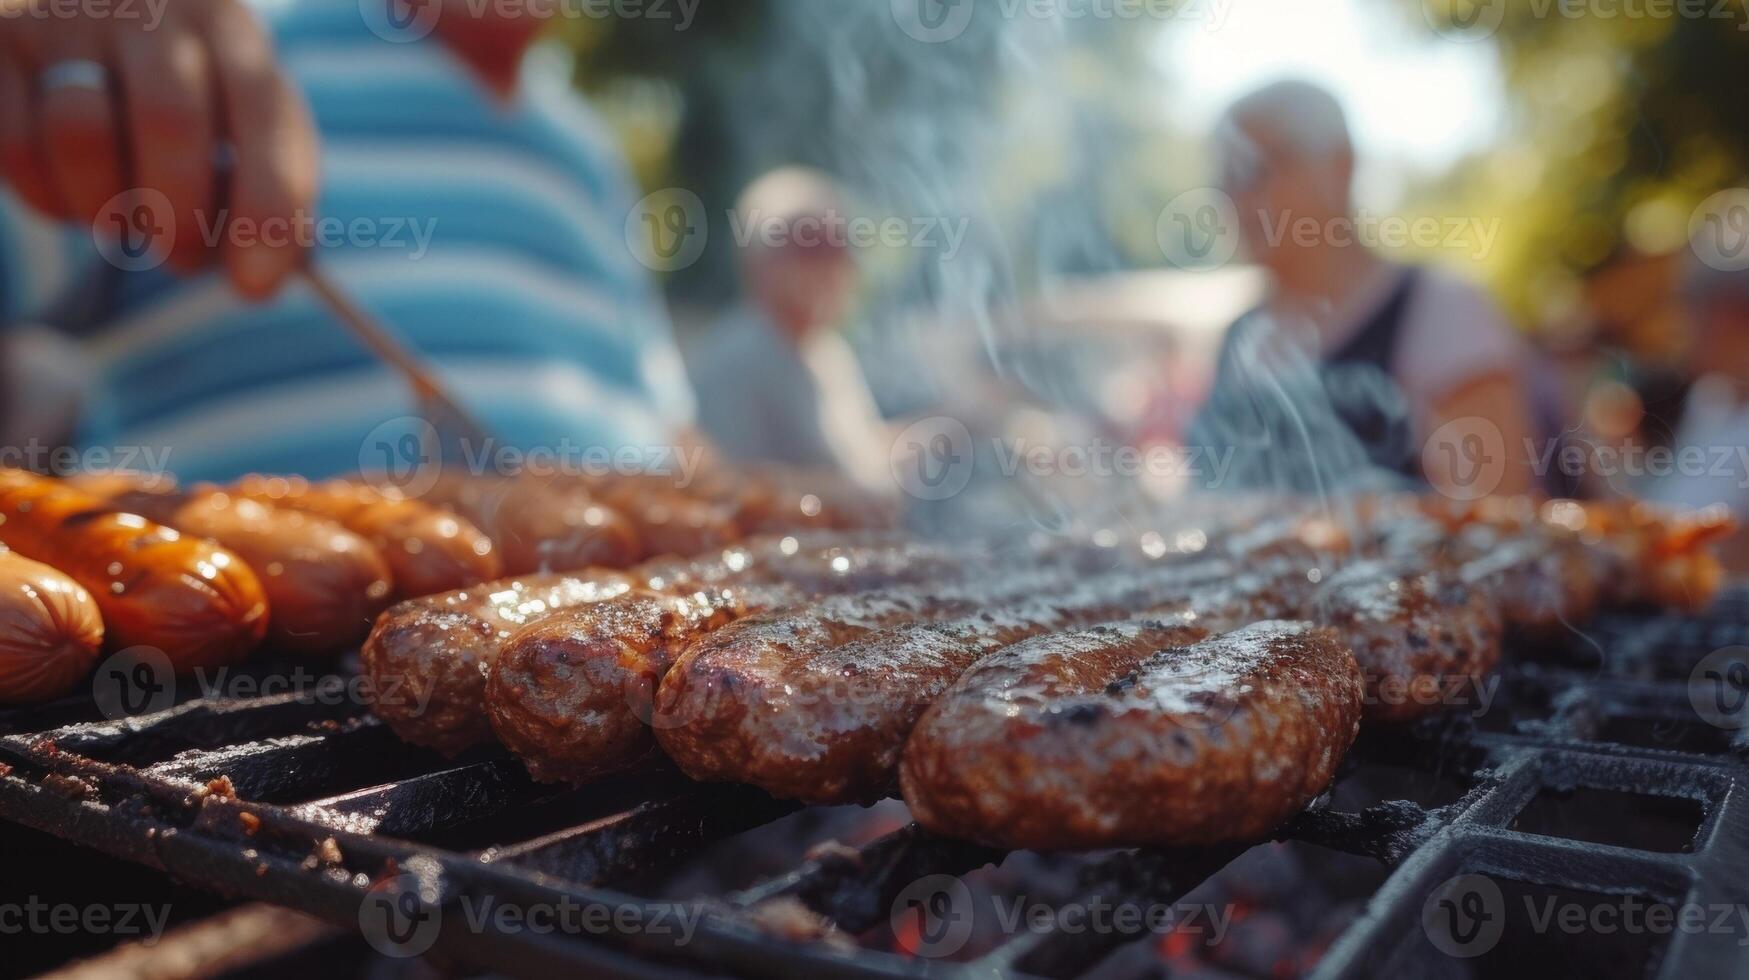 A lively group of retirees dishing out barbecue from a portable grill with the scent of hot dogs and burgers filling the air as they relax and enjoy the company of each other photo